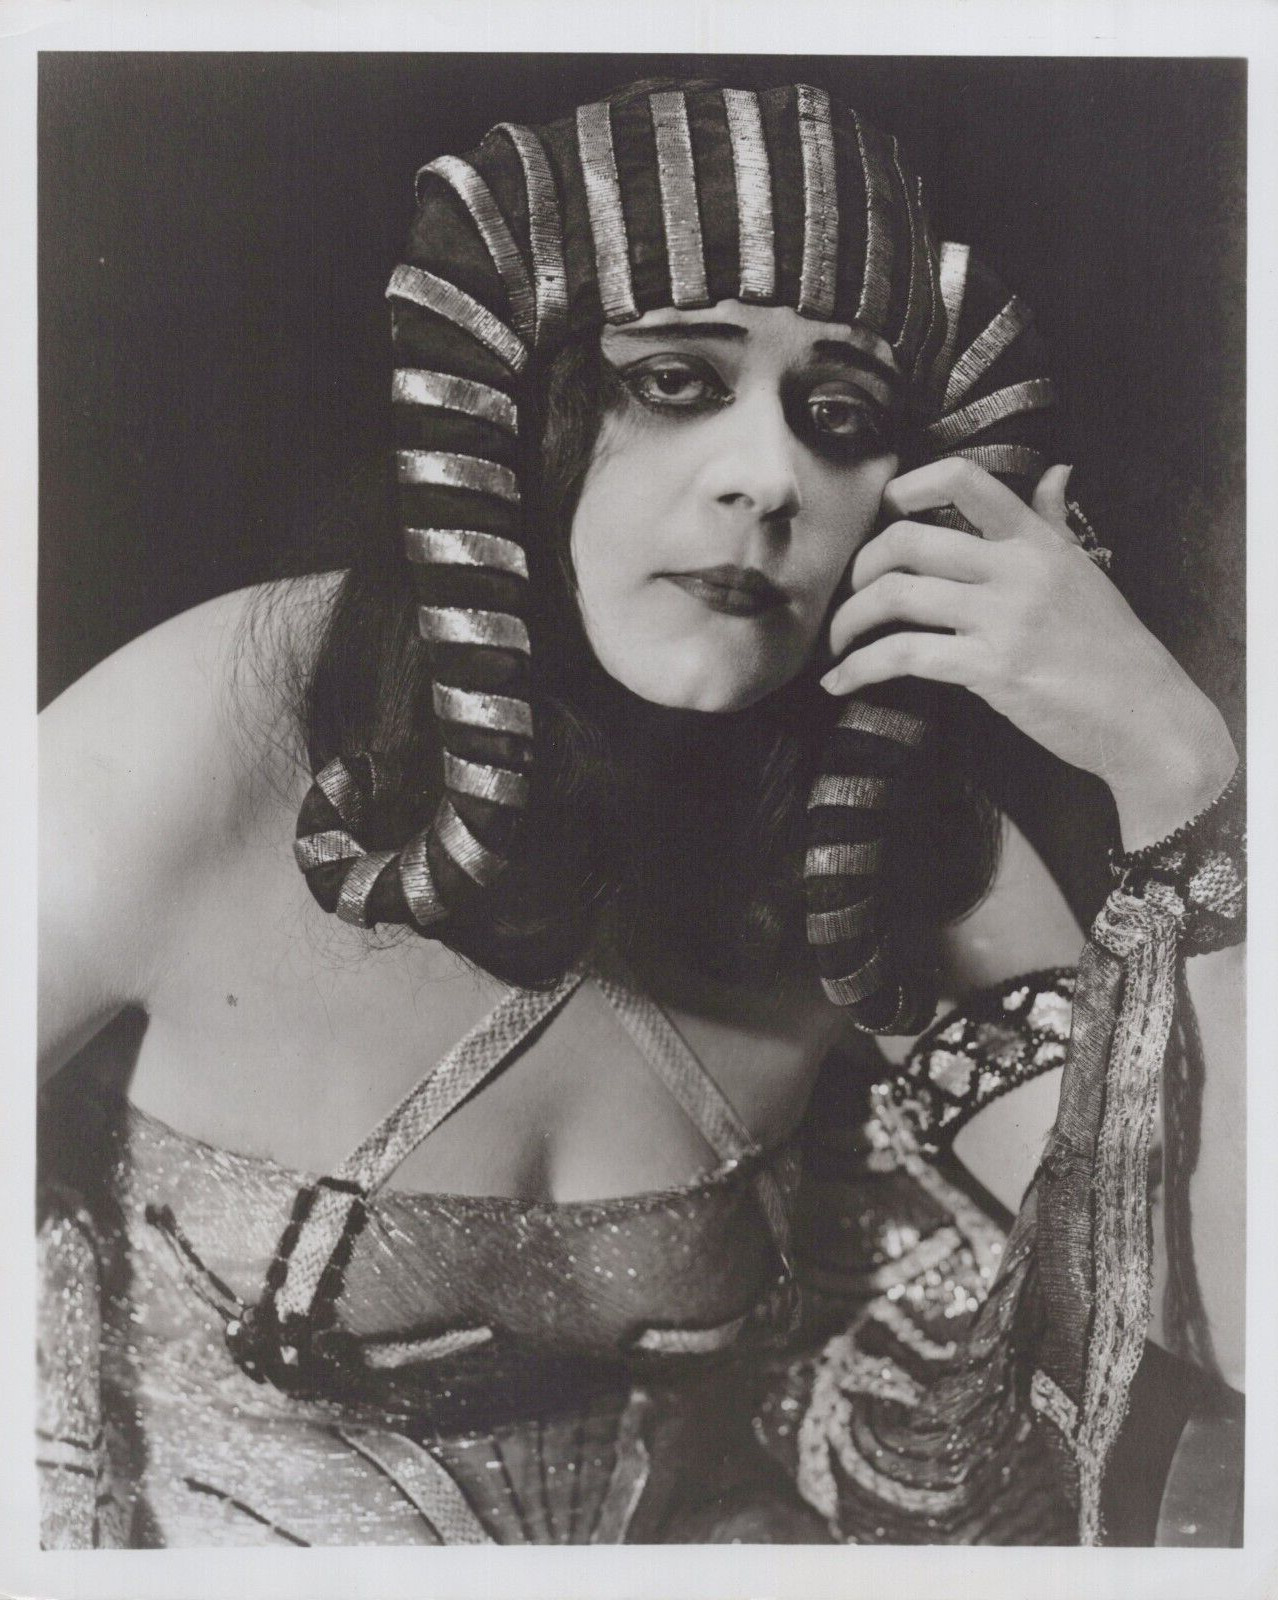 HOLLYWOOD BEAUTY THEDA BARA as CLEOPATRA STUNNING PORTRAIT 1960s Photo C23